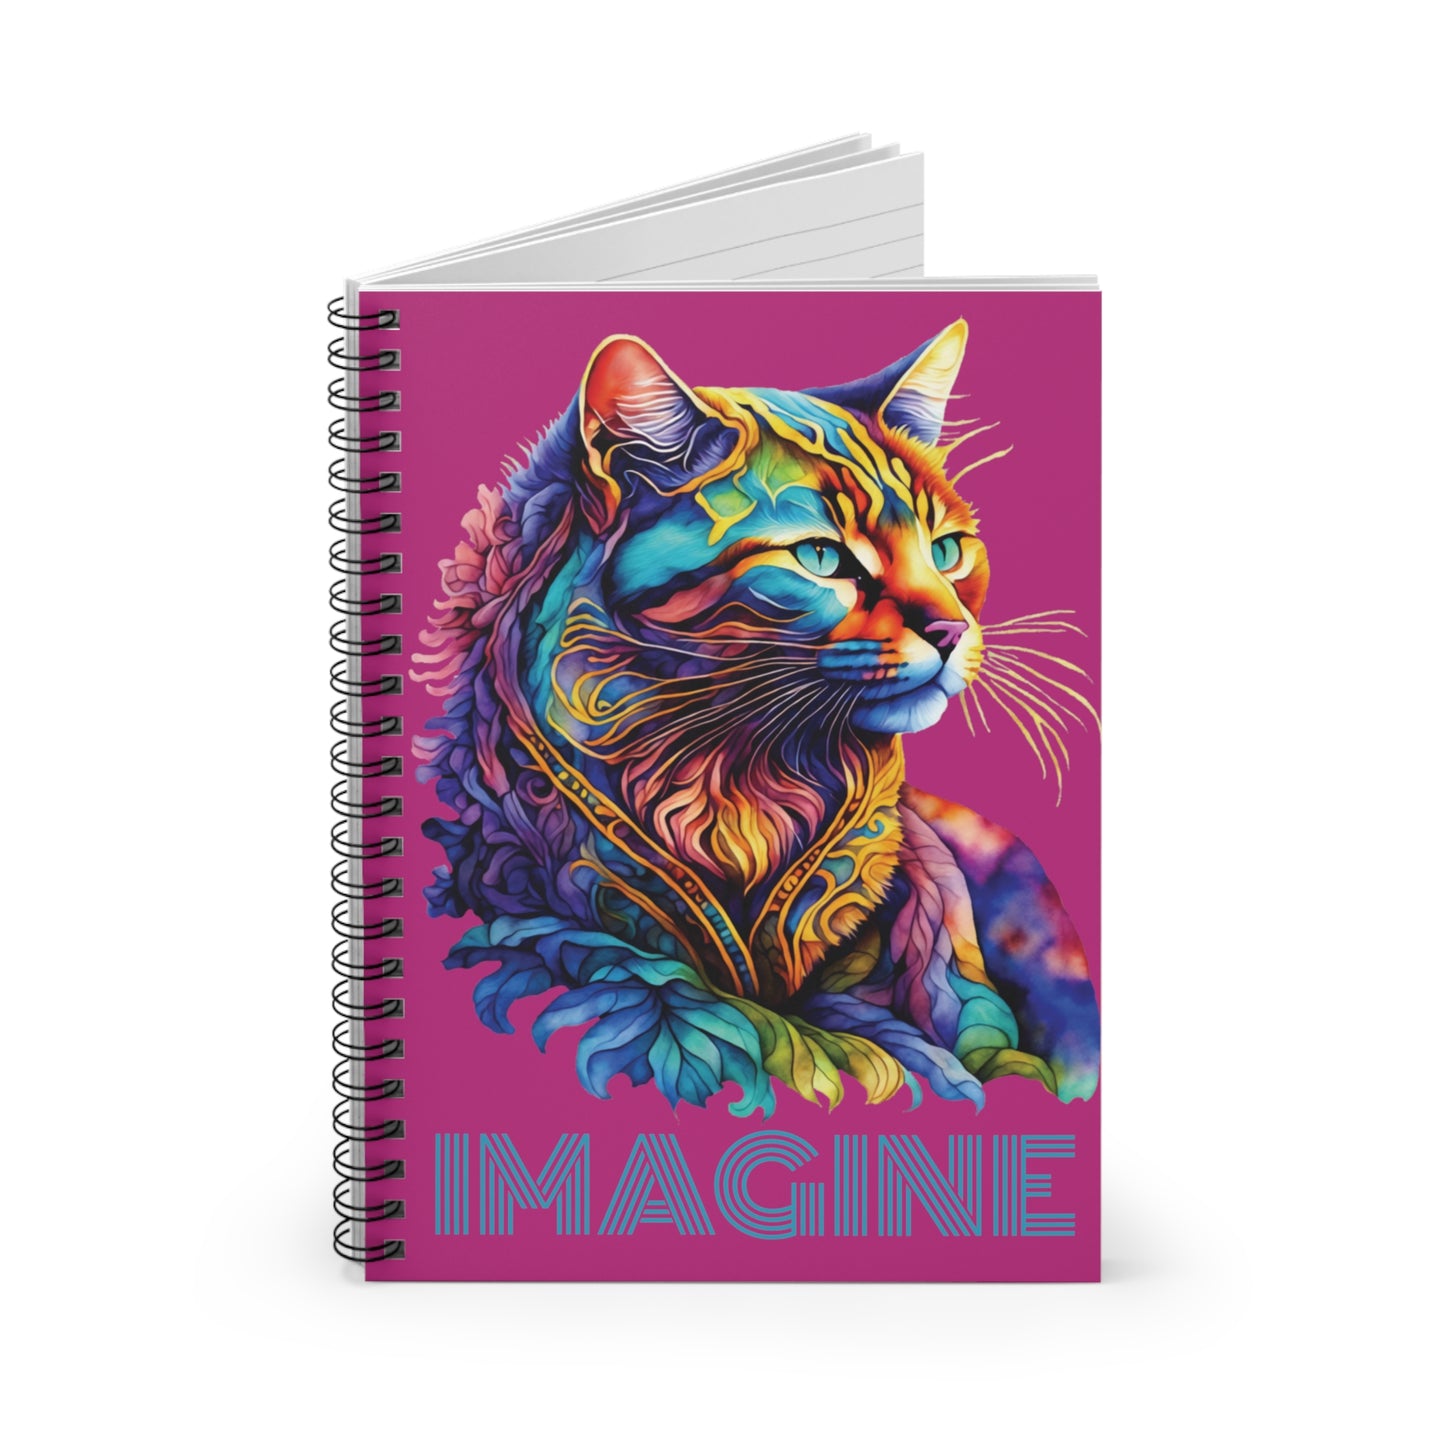 Cat IMAGINE pink Spiral Notebook - Ruled Line - Perfect Gift